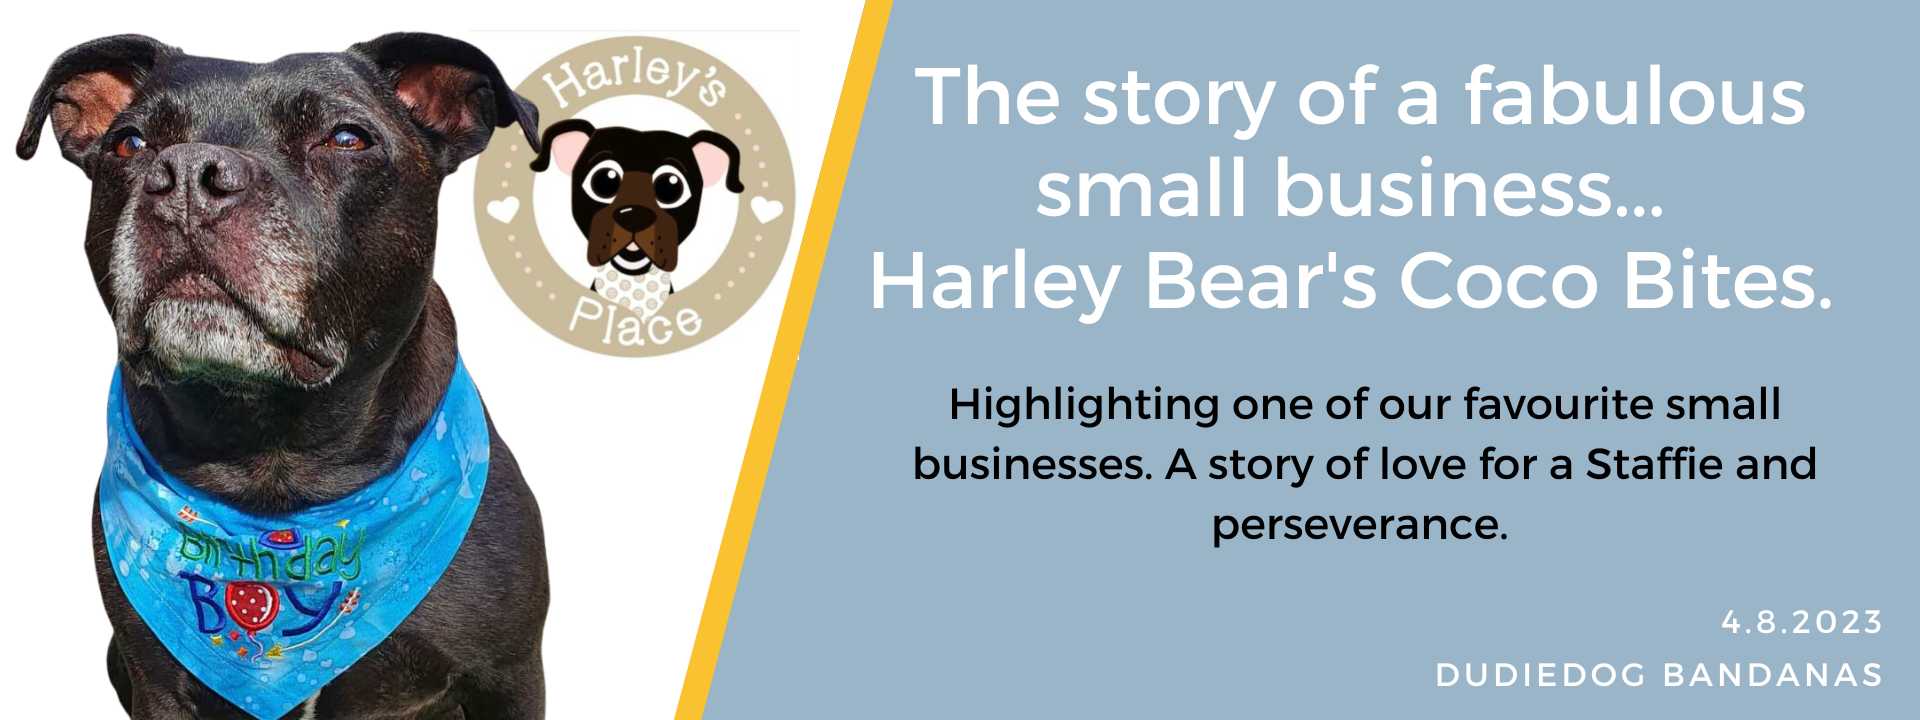 The Story of Harley Bear's Coco Bites